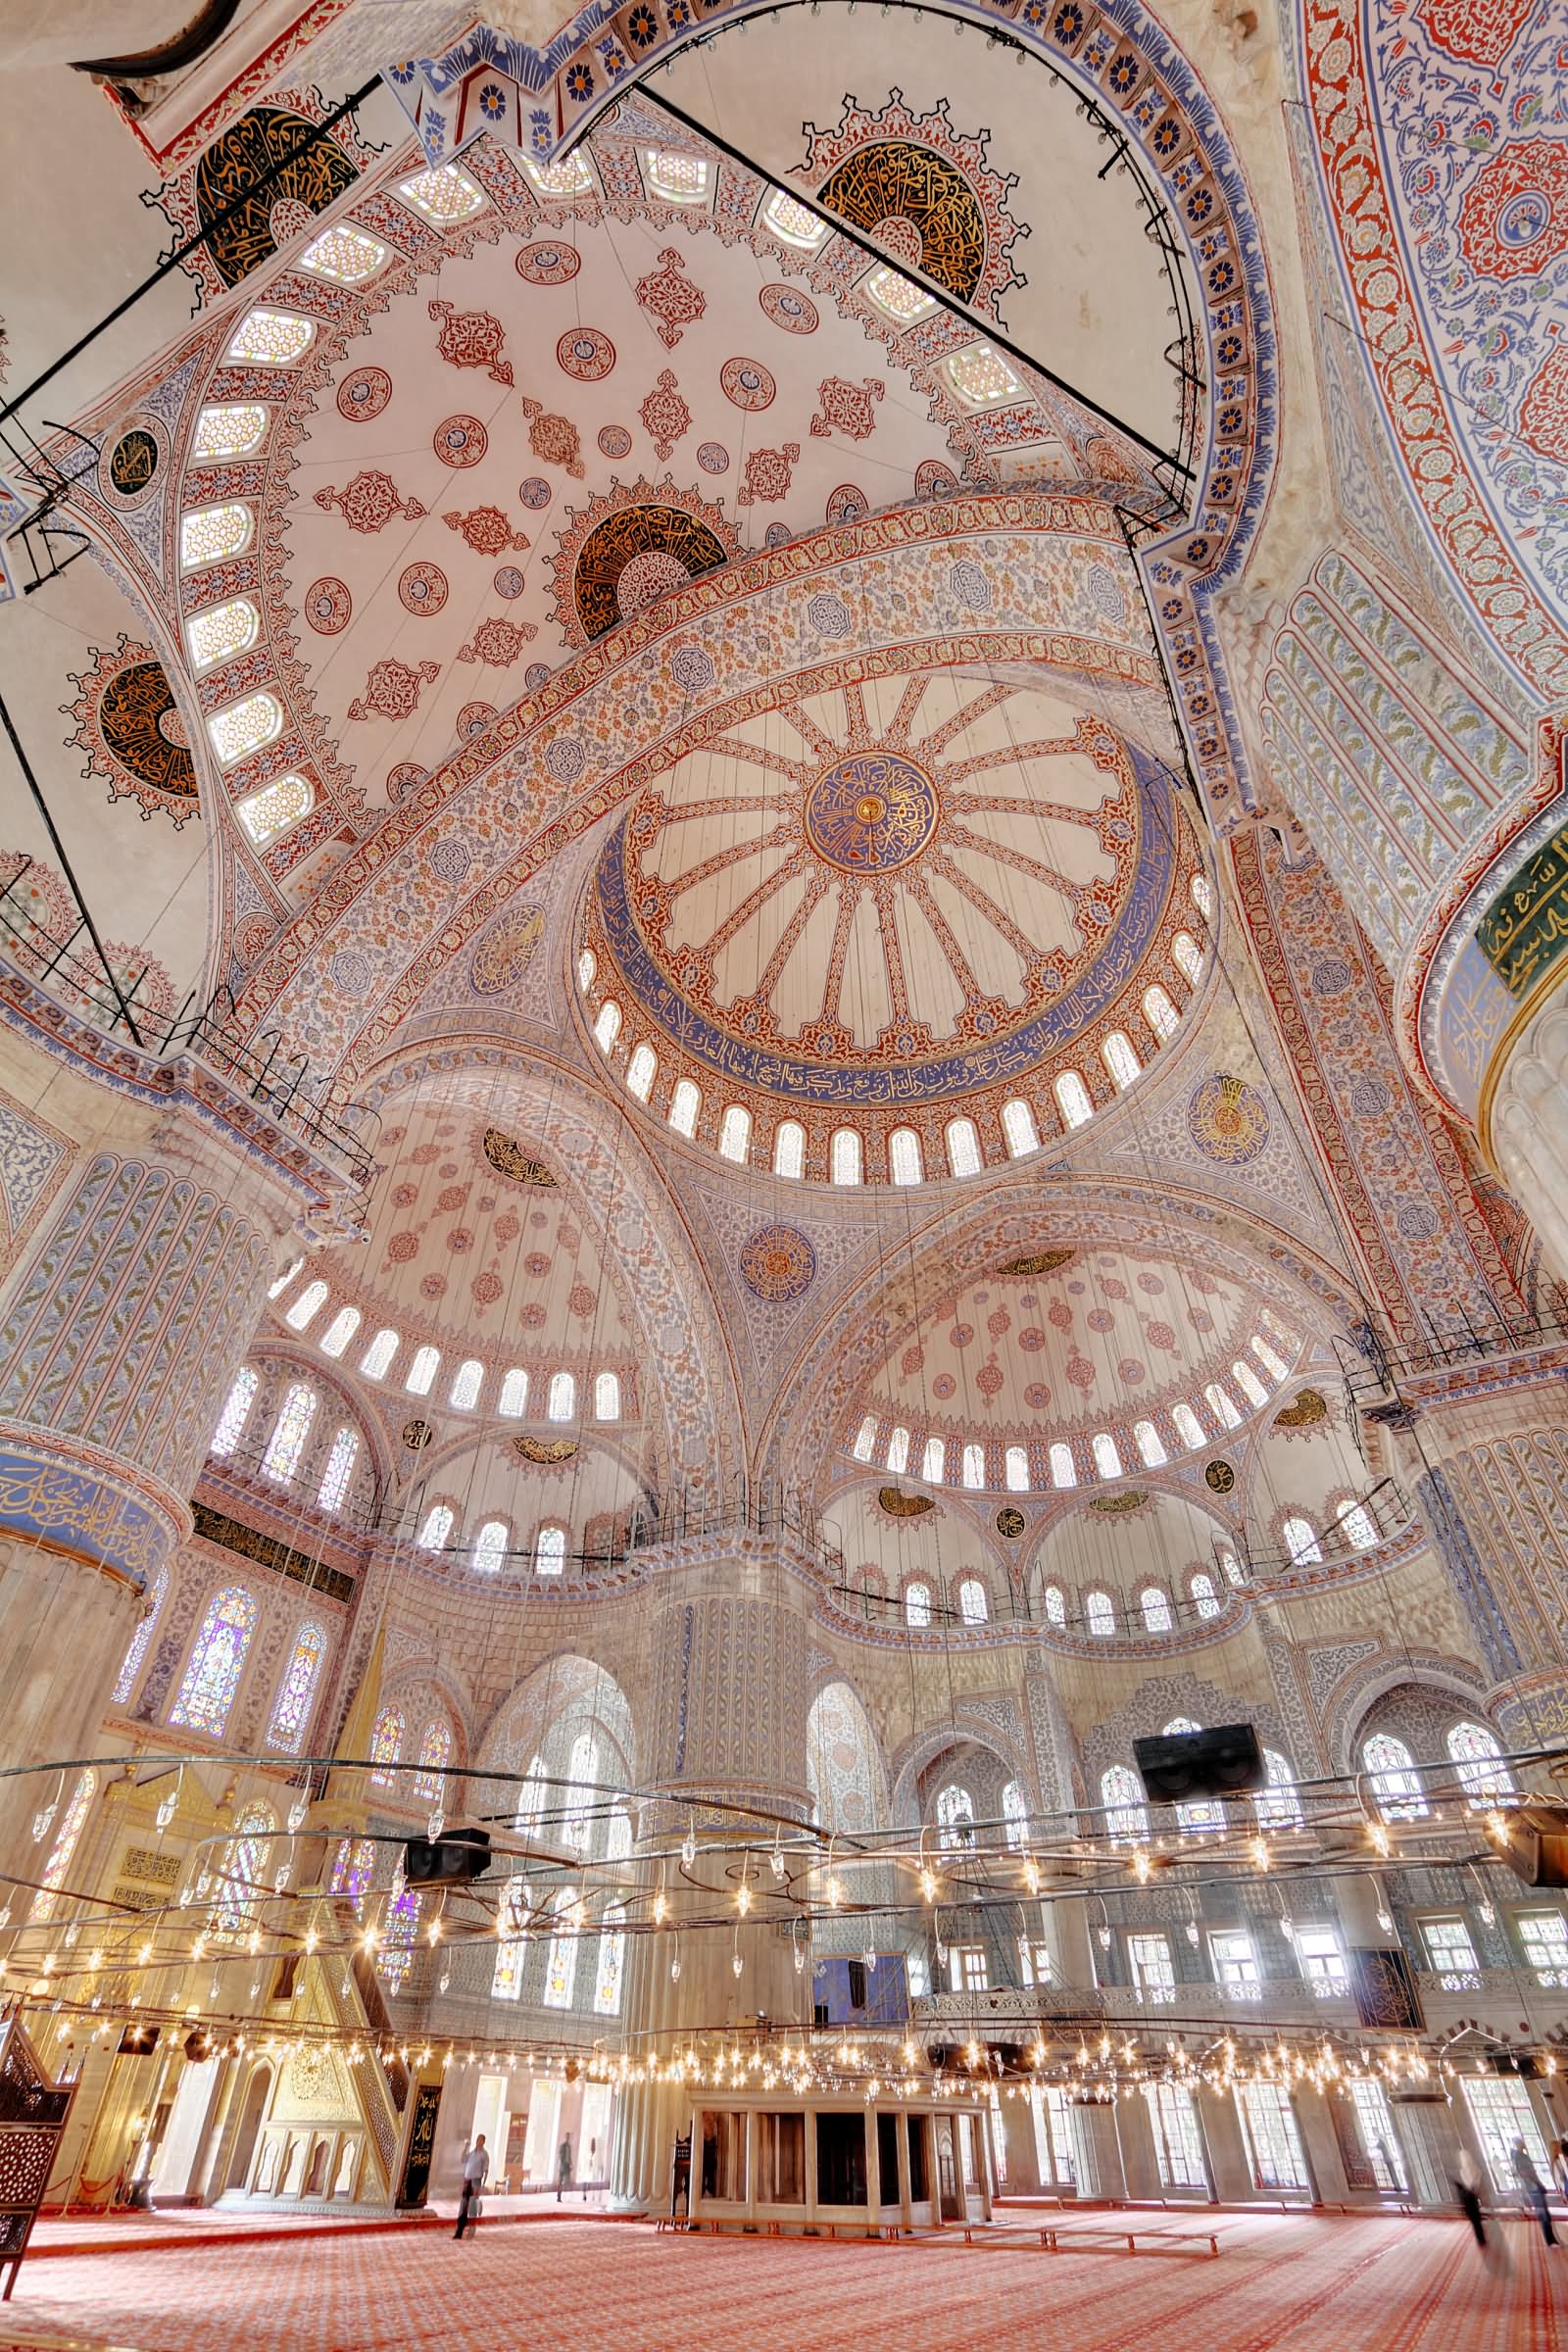 Dome Inside The Blue Mosque, Istanbul